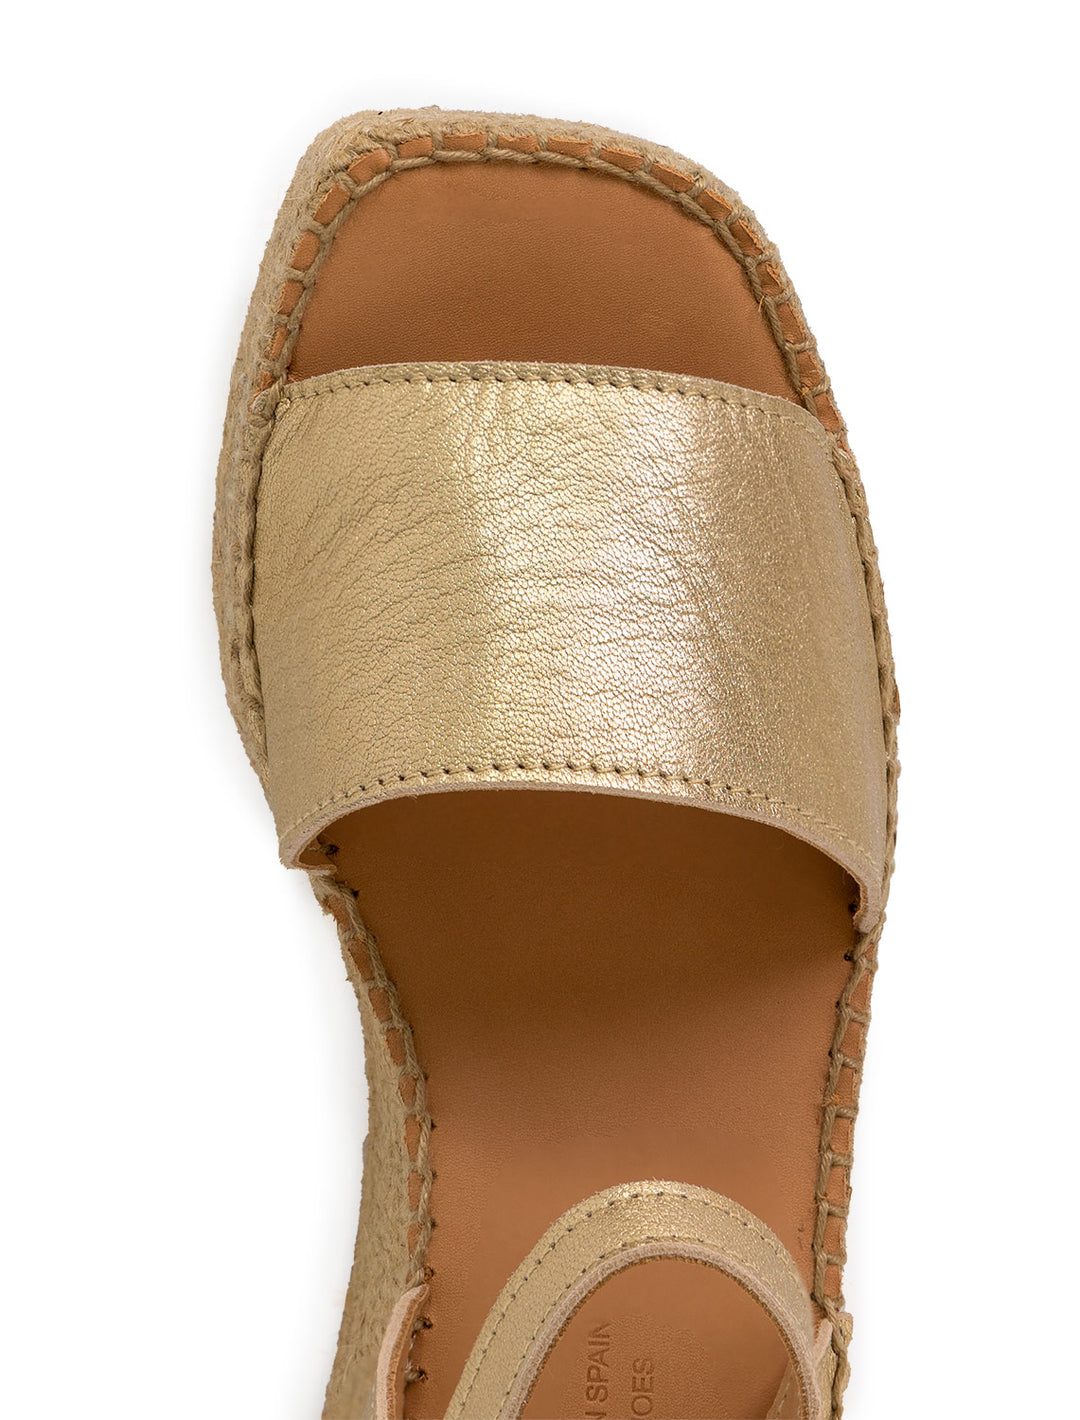 Close-up view of Naguisa's rall espadrille wedge in metallic gold.